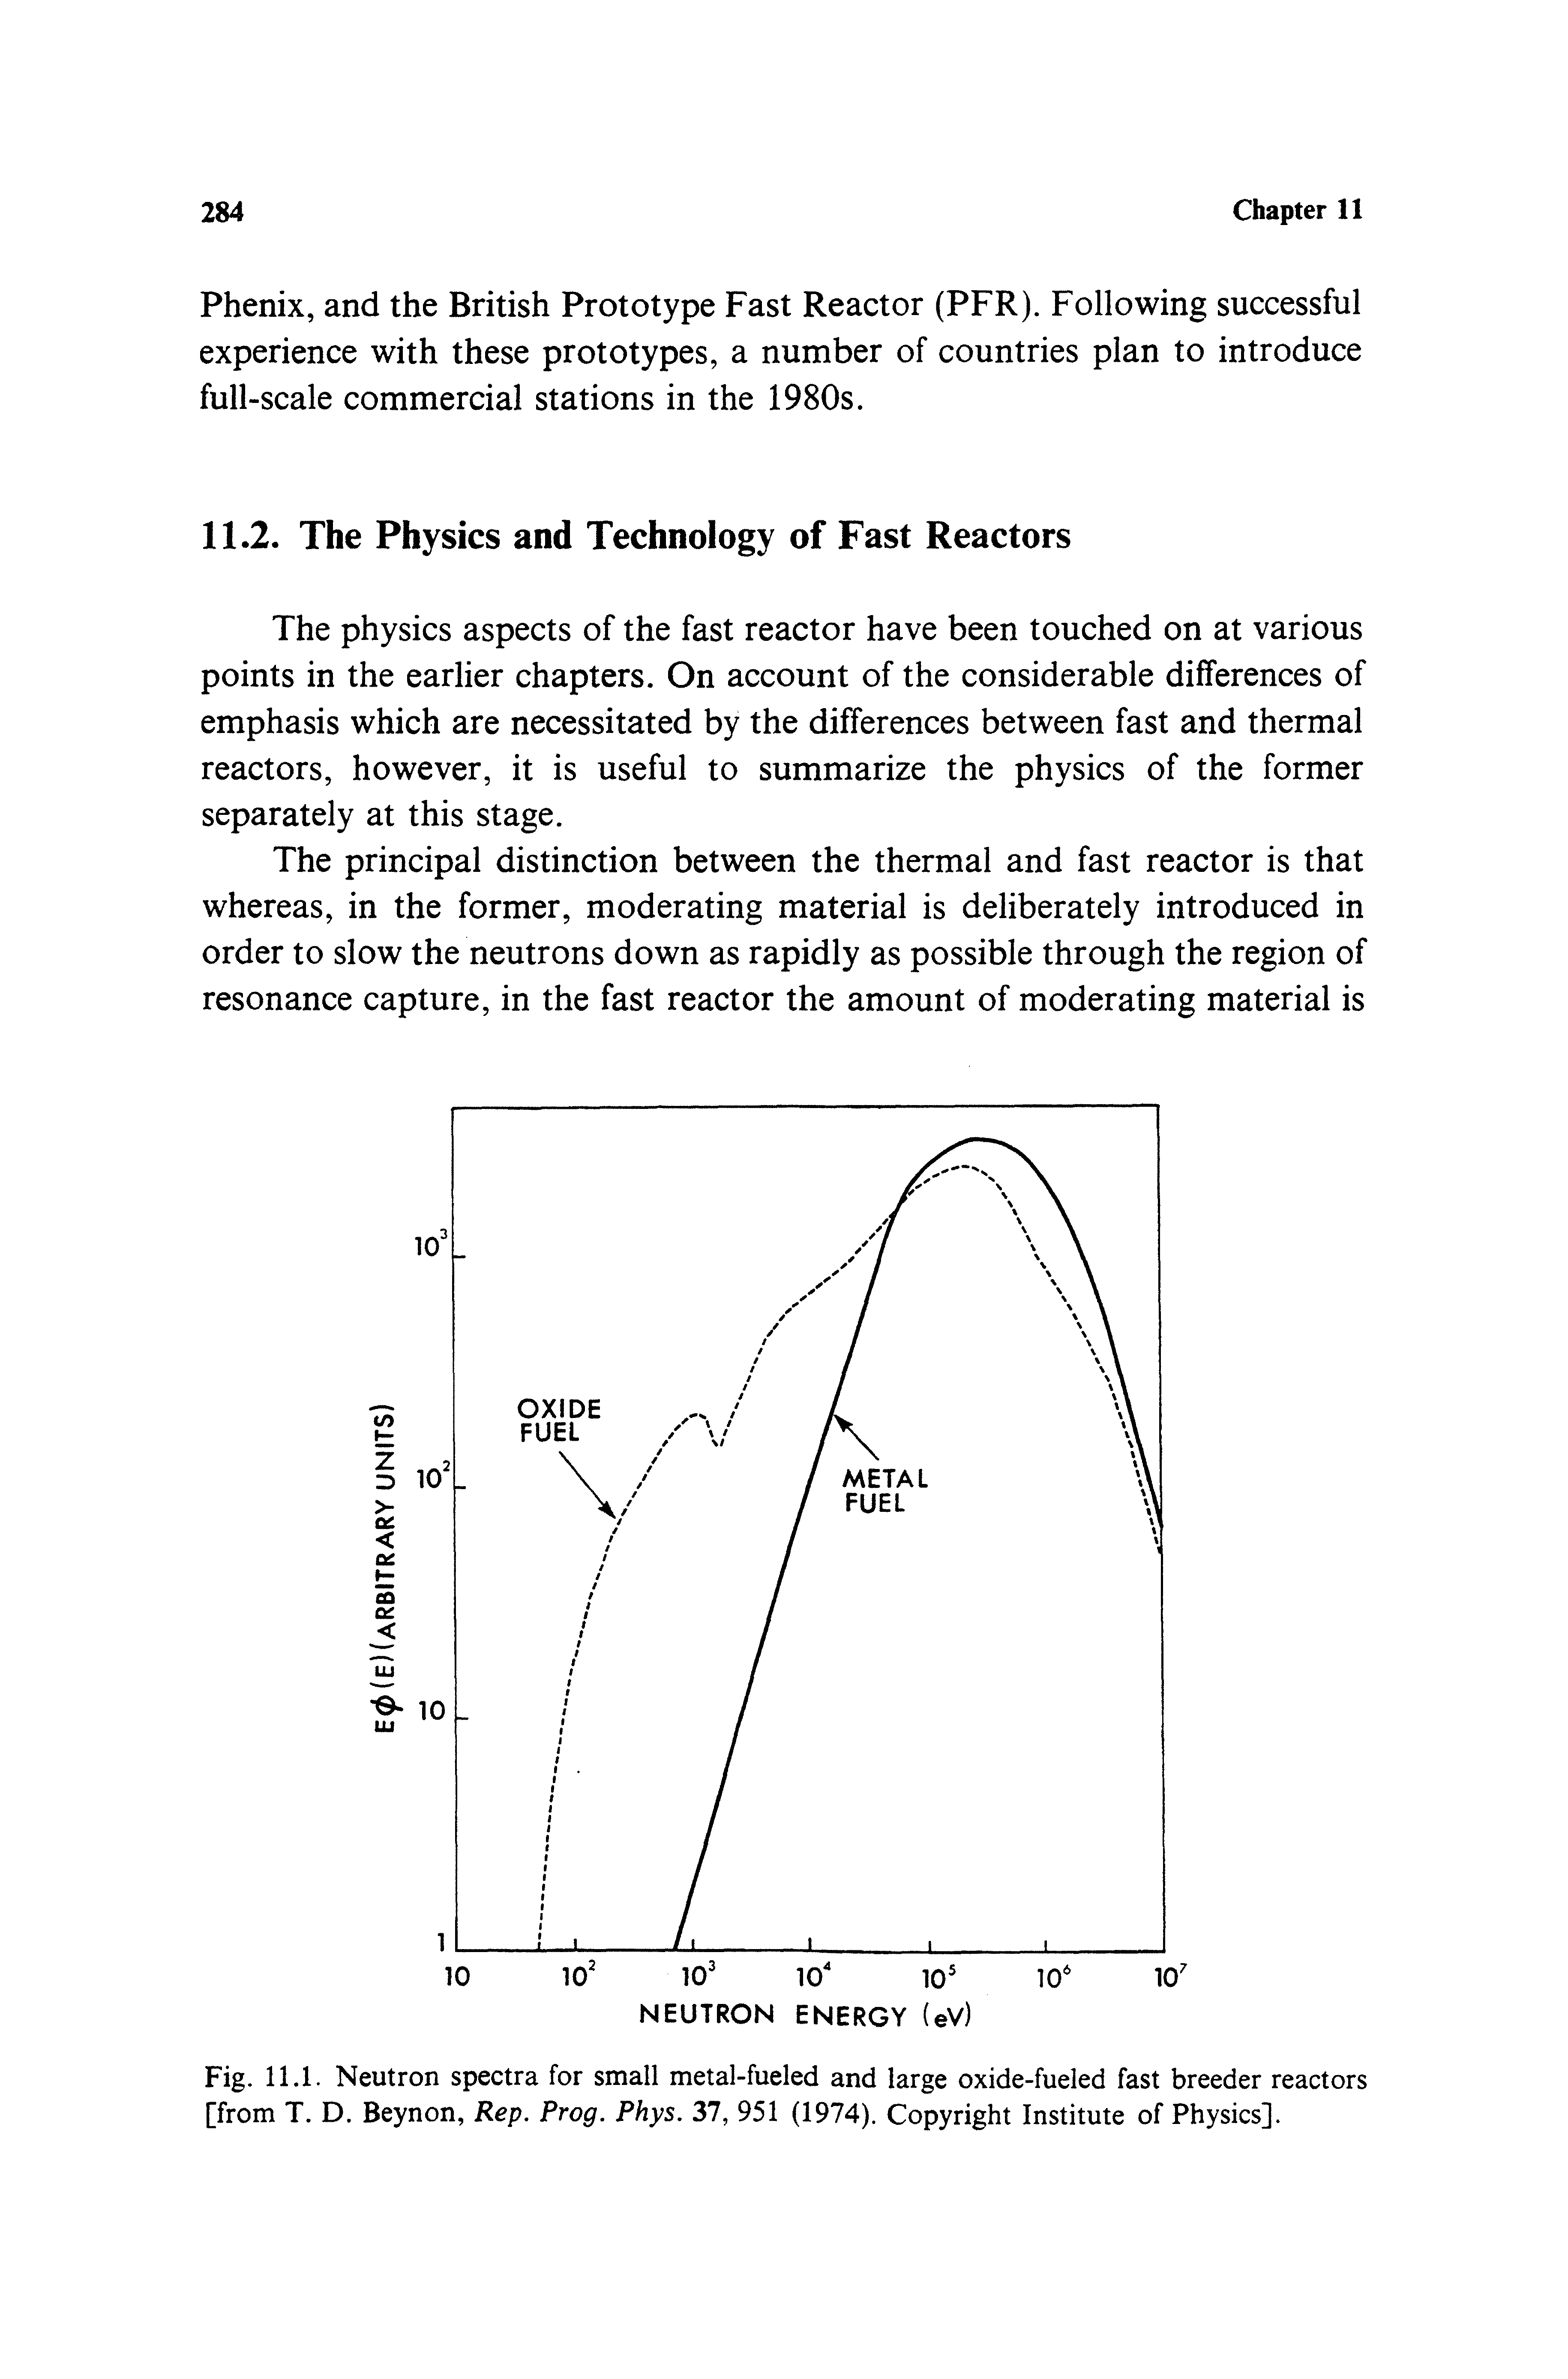 Fig. 11.1. Neutron spectra for small metal-fueled and large oxide-fueled fast breeder reactors [from T. D. Beynon, Rep. Prog. Phys. 37, 951 (1974). Copyright Institute of Physics].